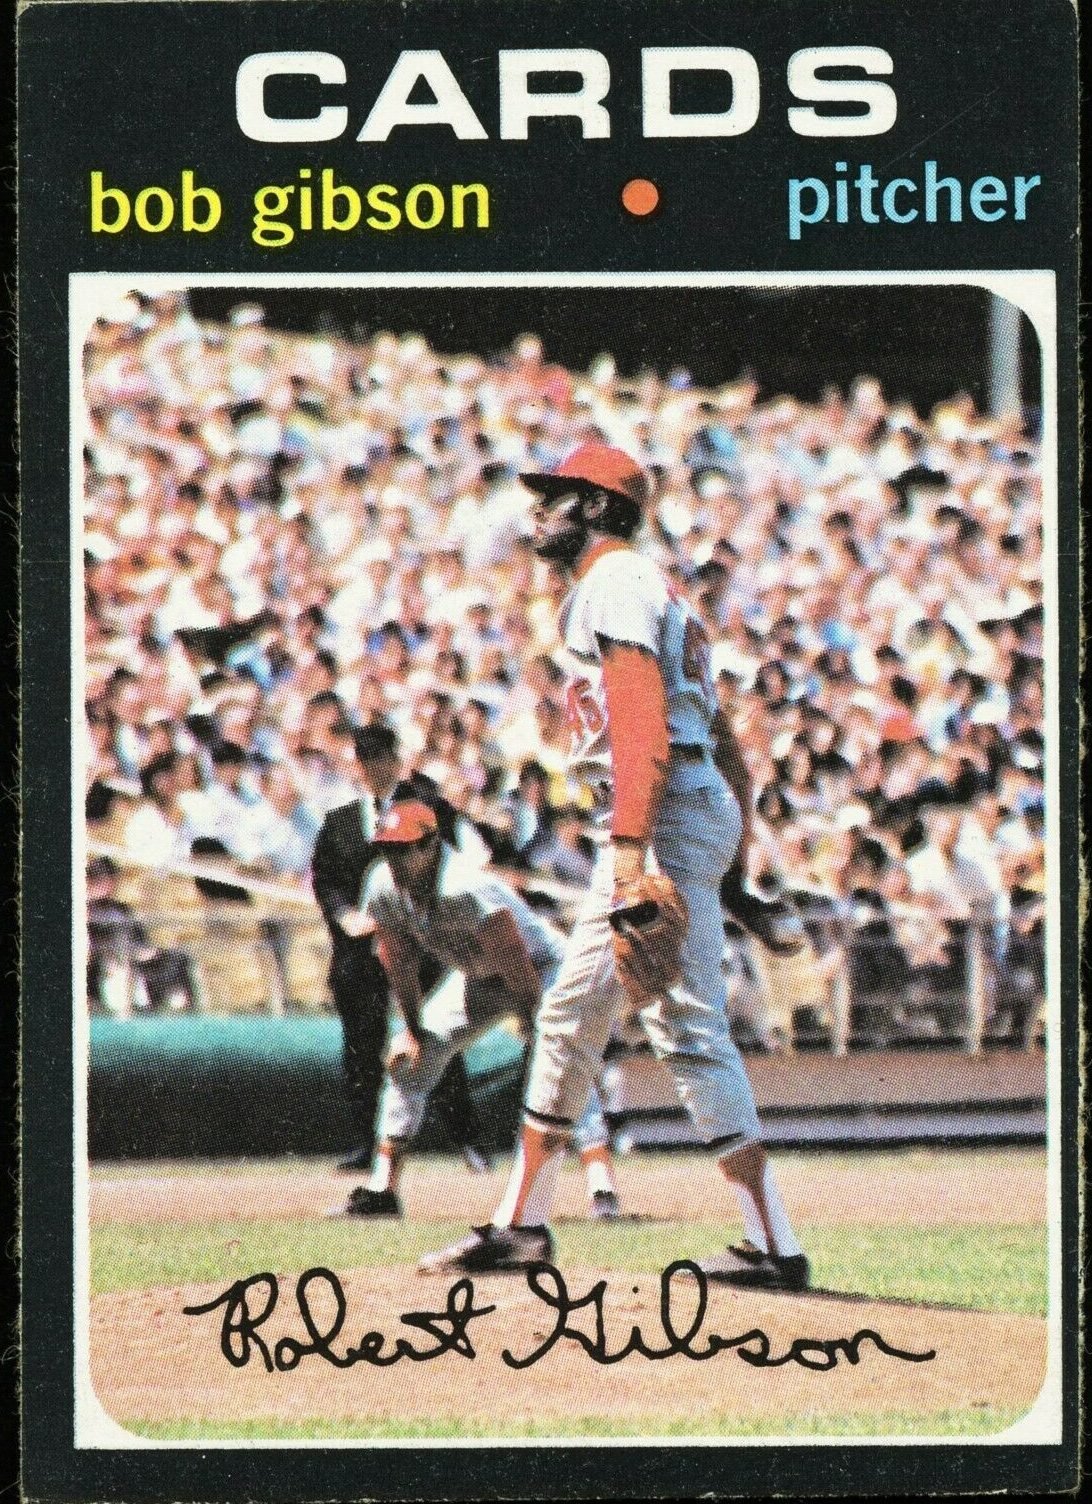 A baseball dream: $5,000 plus meal money and tips from Bob Gibson